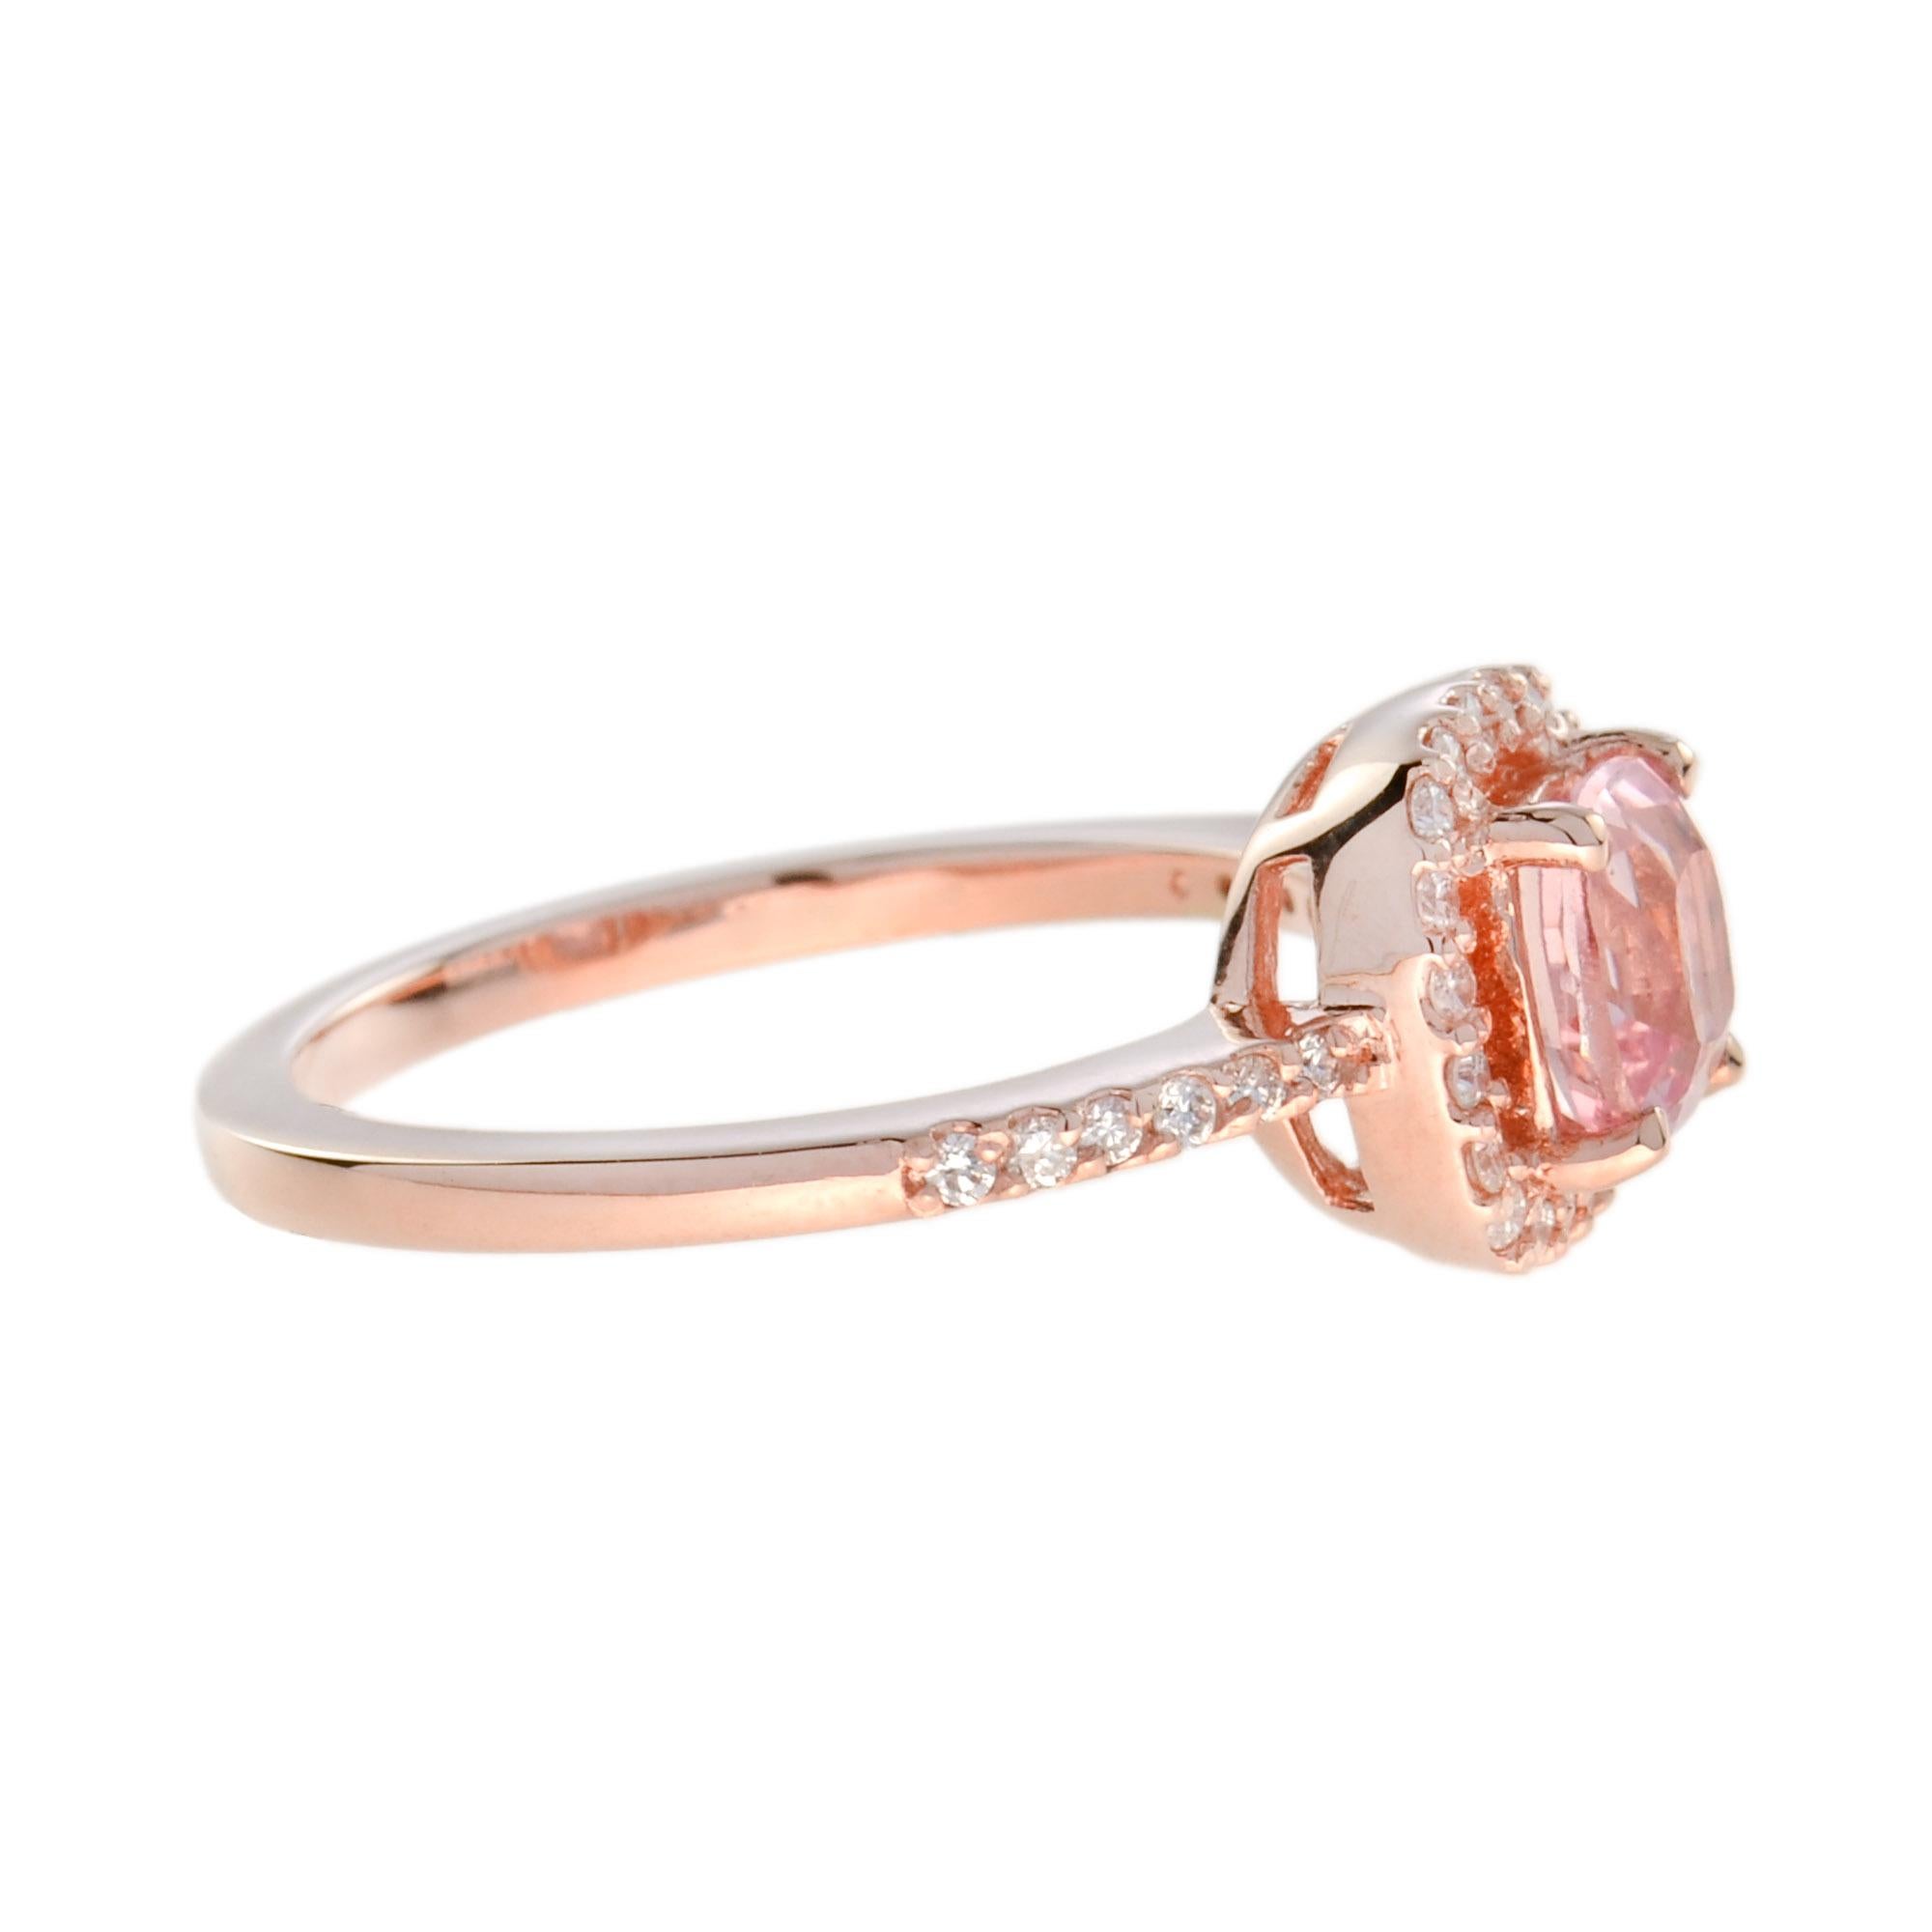 For Sale:  Halona Cushion Morganite and Diamond Halo Ring in 14K Rose Gold 3